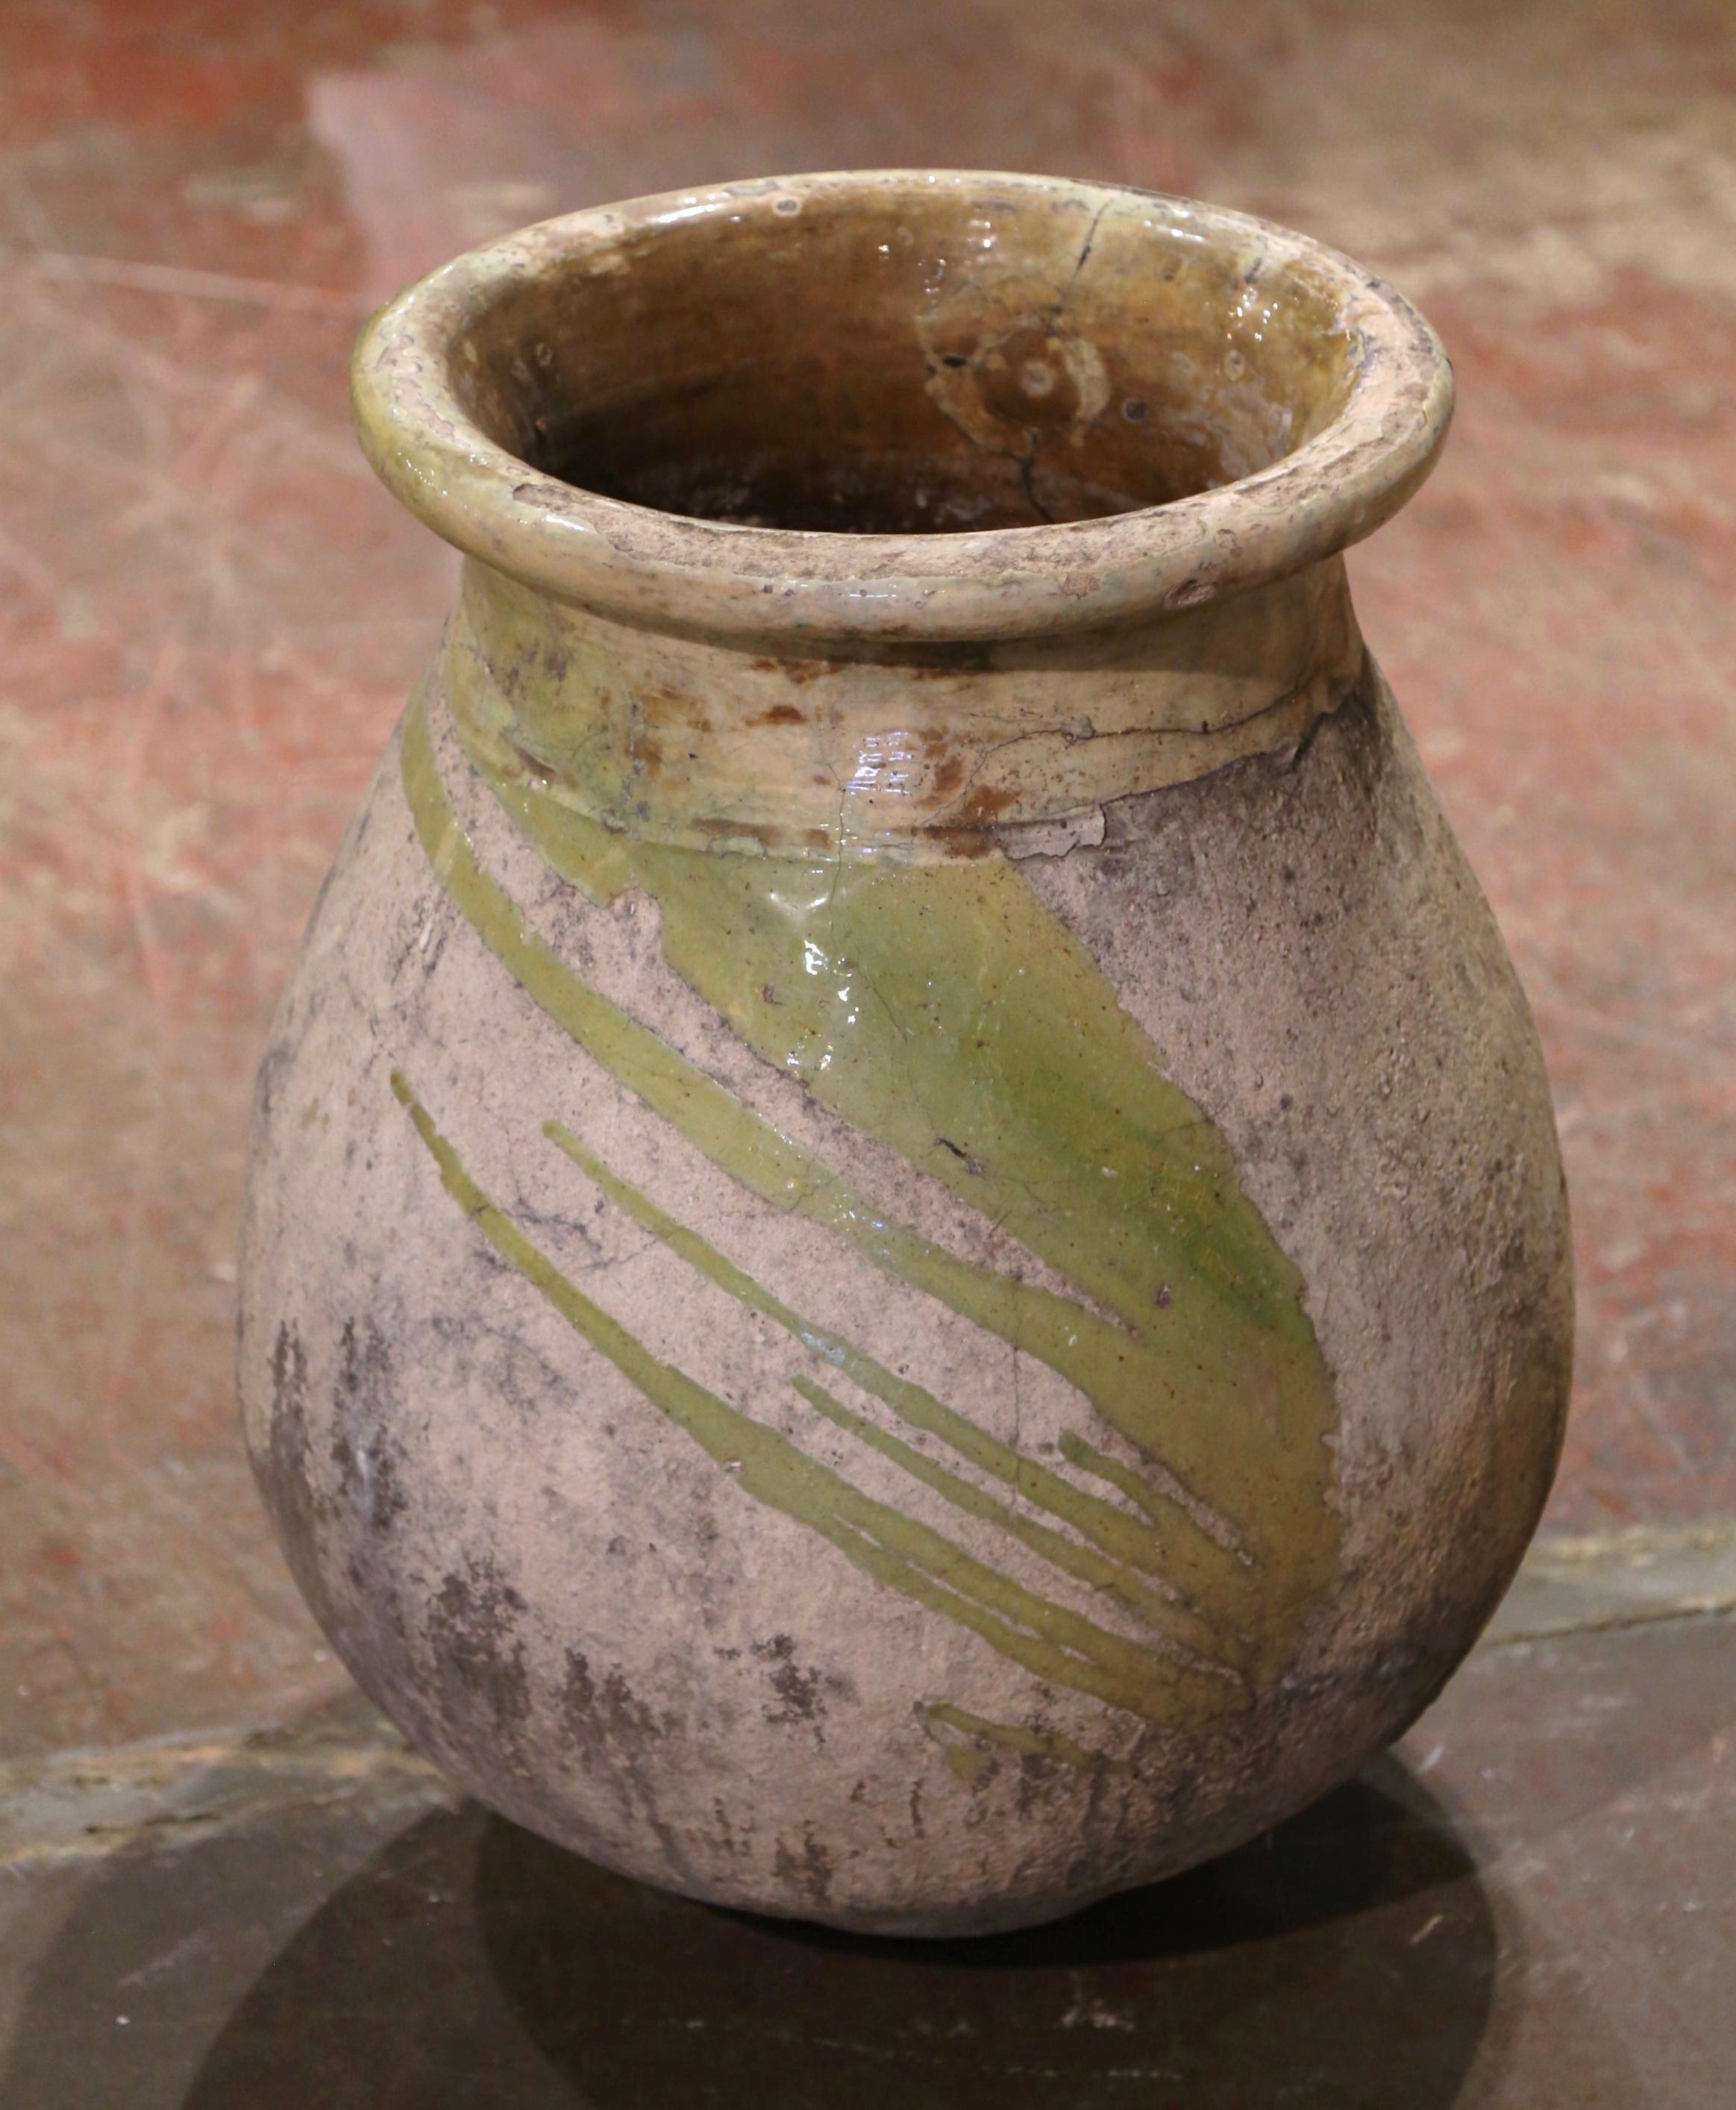 This antique earthenware olive jar was created in Biot, Southern France, circa 1760. Made of blond clay and neutral in color, the terracotta vase has a traditional round bulbous shape. The rustic, time-worn pot features a pale green glaze around the